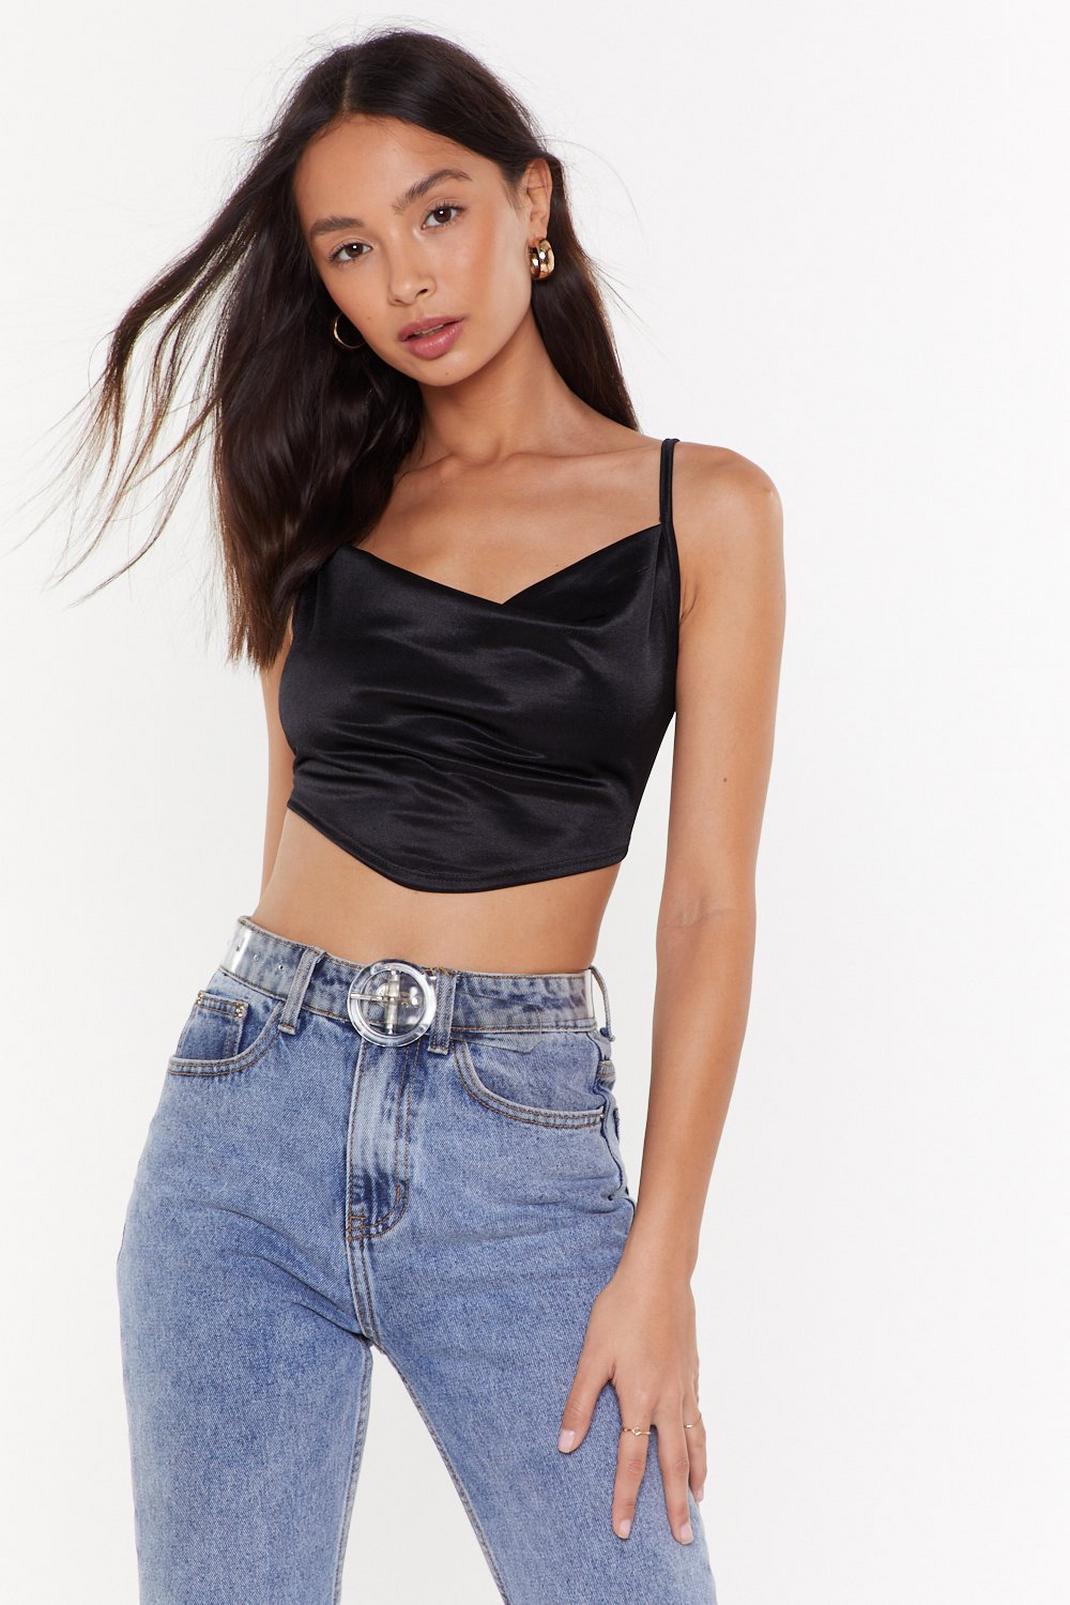 Let's Cowl It Love Satin Strappy Crop Top image number 1